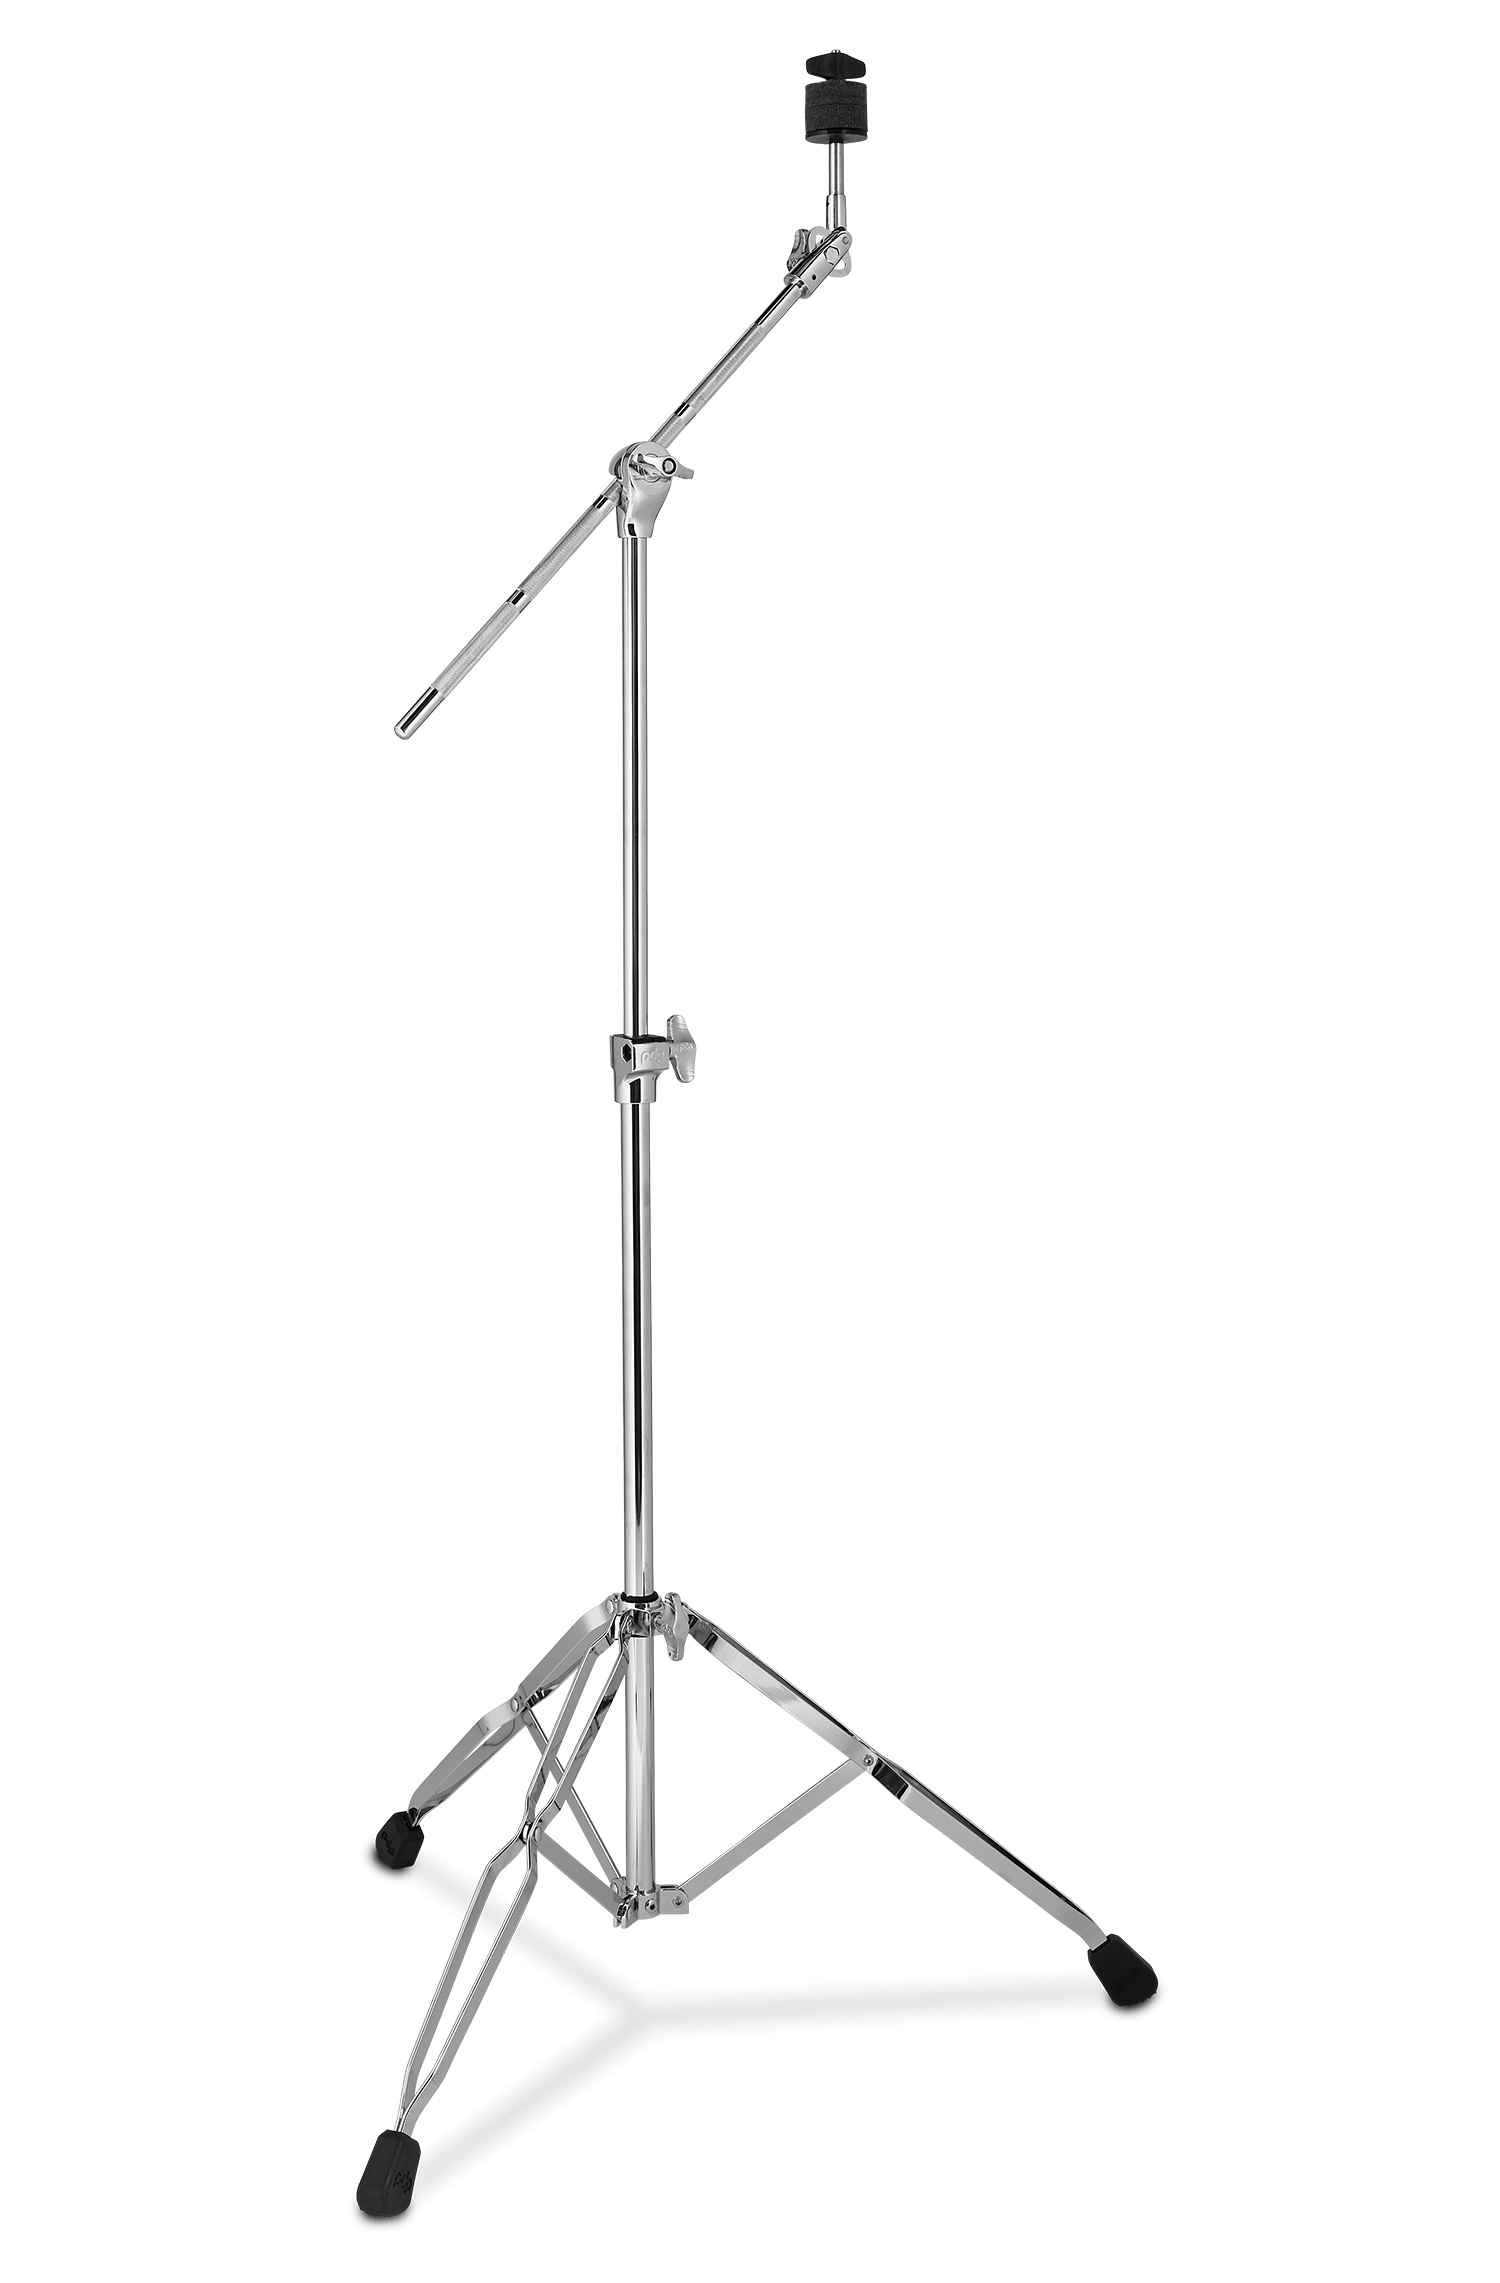 PDP 700 Series Cymbal Boom Stand